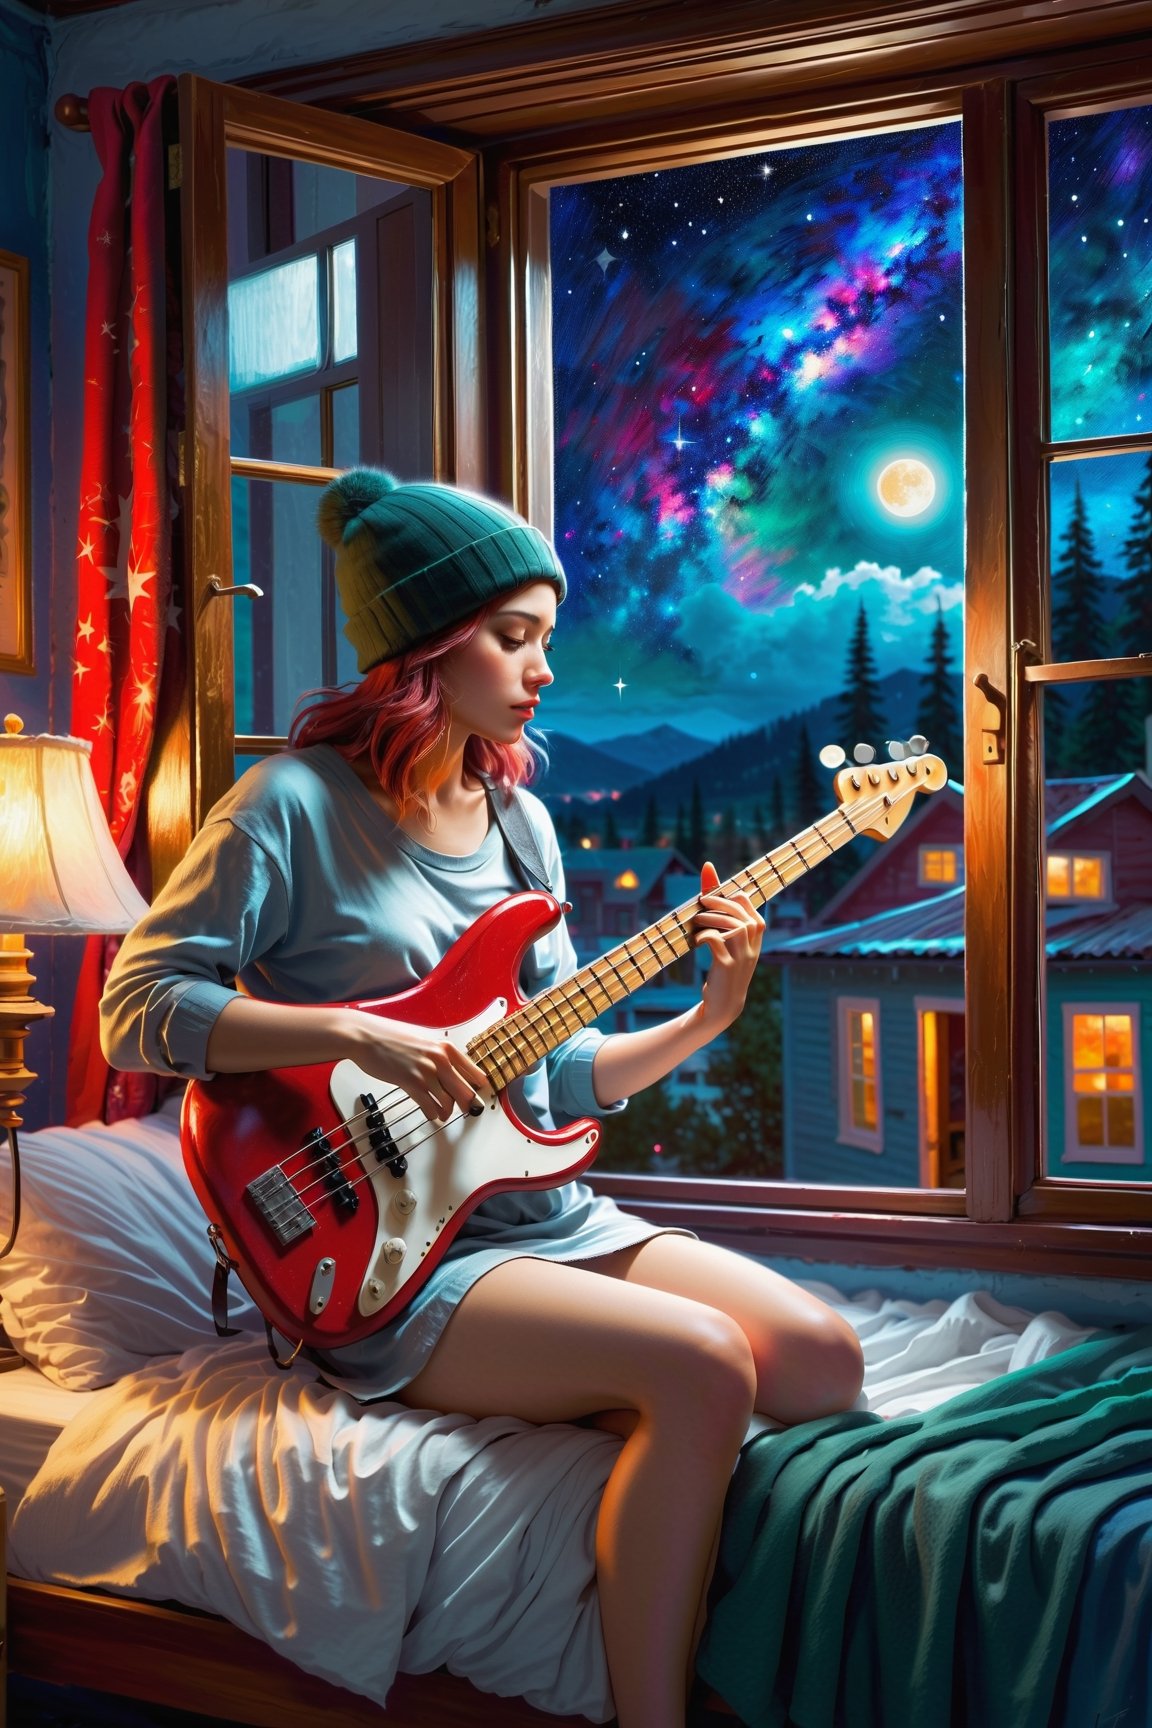 girl, beanie, bedroom, bed, playing bass guitar, night time, star map outside, in the style of Pino Daeni, outside shine, window, tranquil shadow dream fluctuation, interior, door, electric powder blue, scarlet and emerald tinge, soviet, silent contemplation, expand, Matte, Focal Point create, creepy, tempera, urban evening,